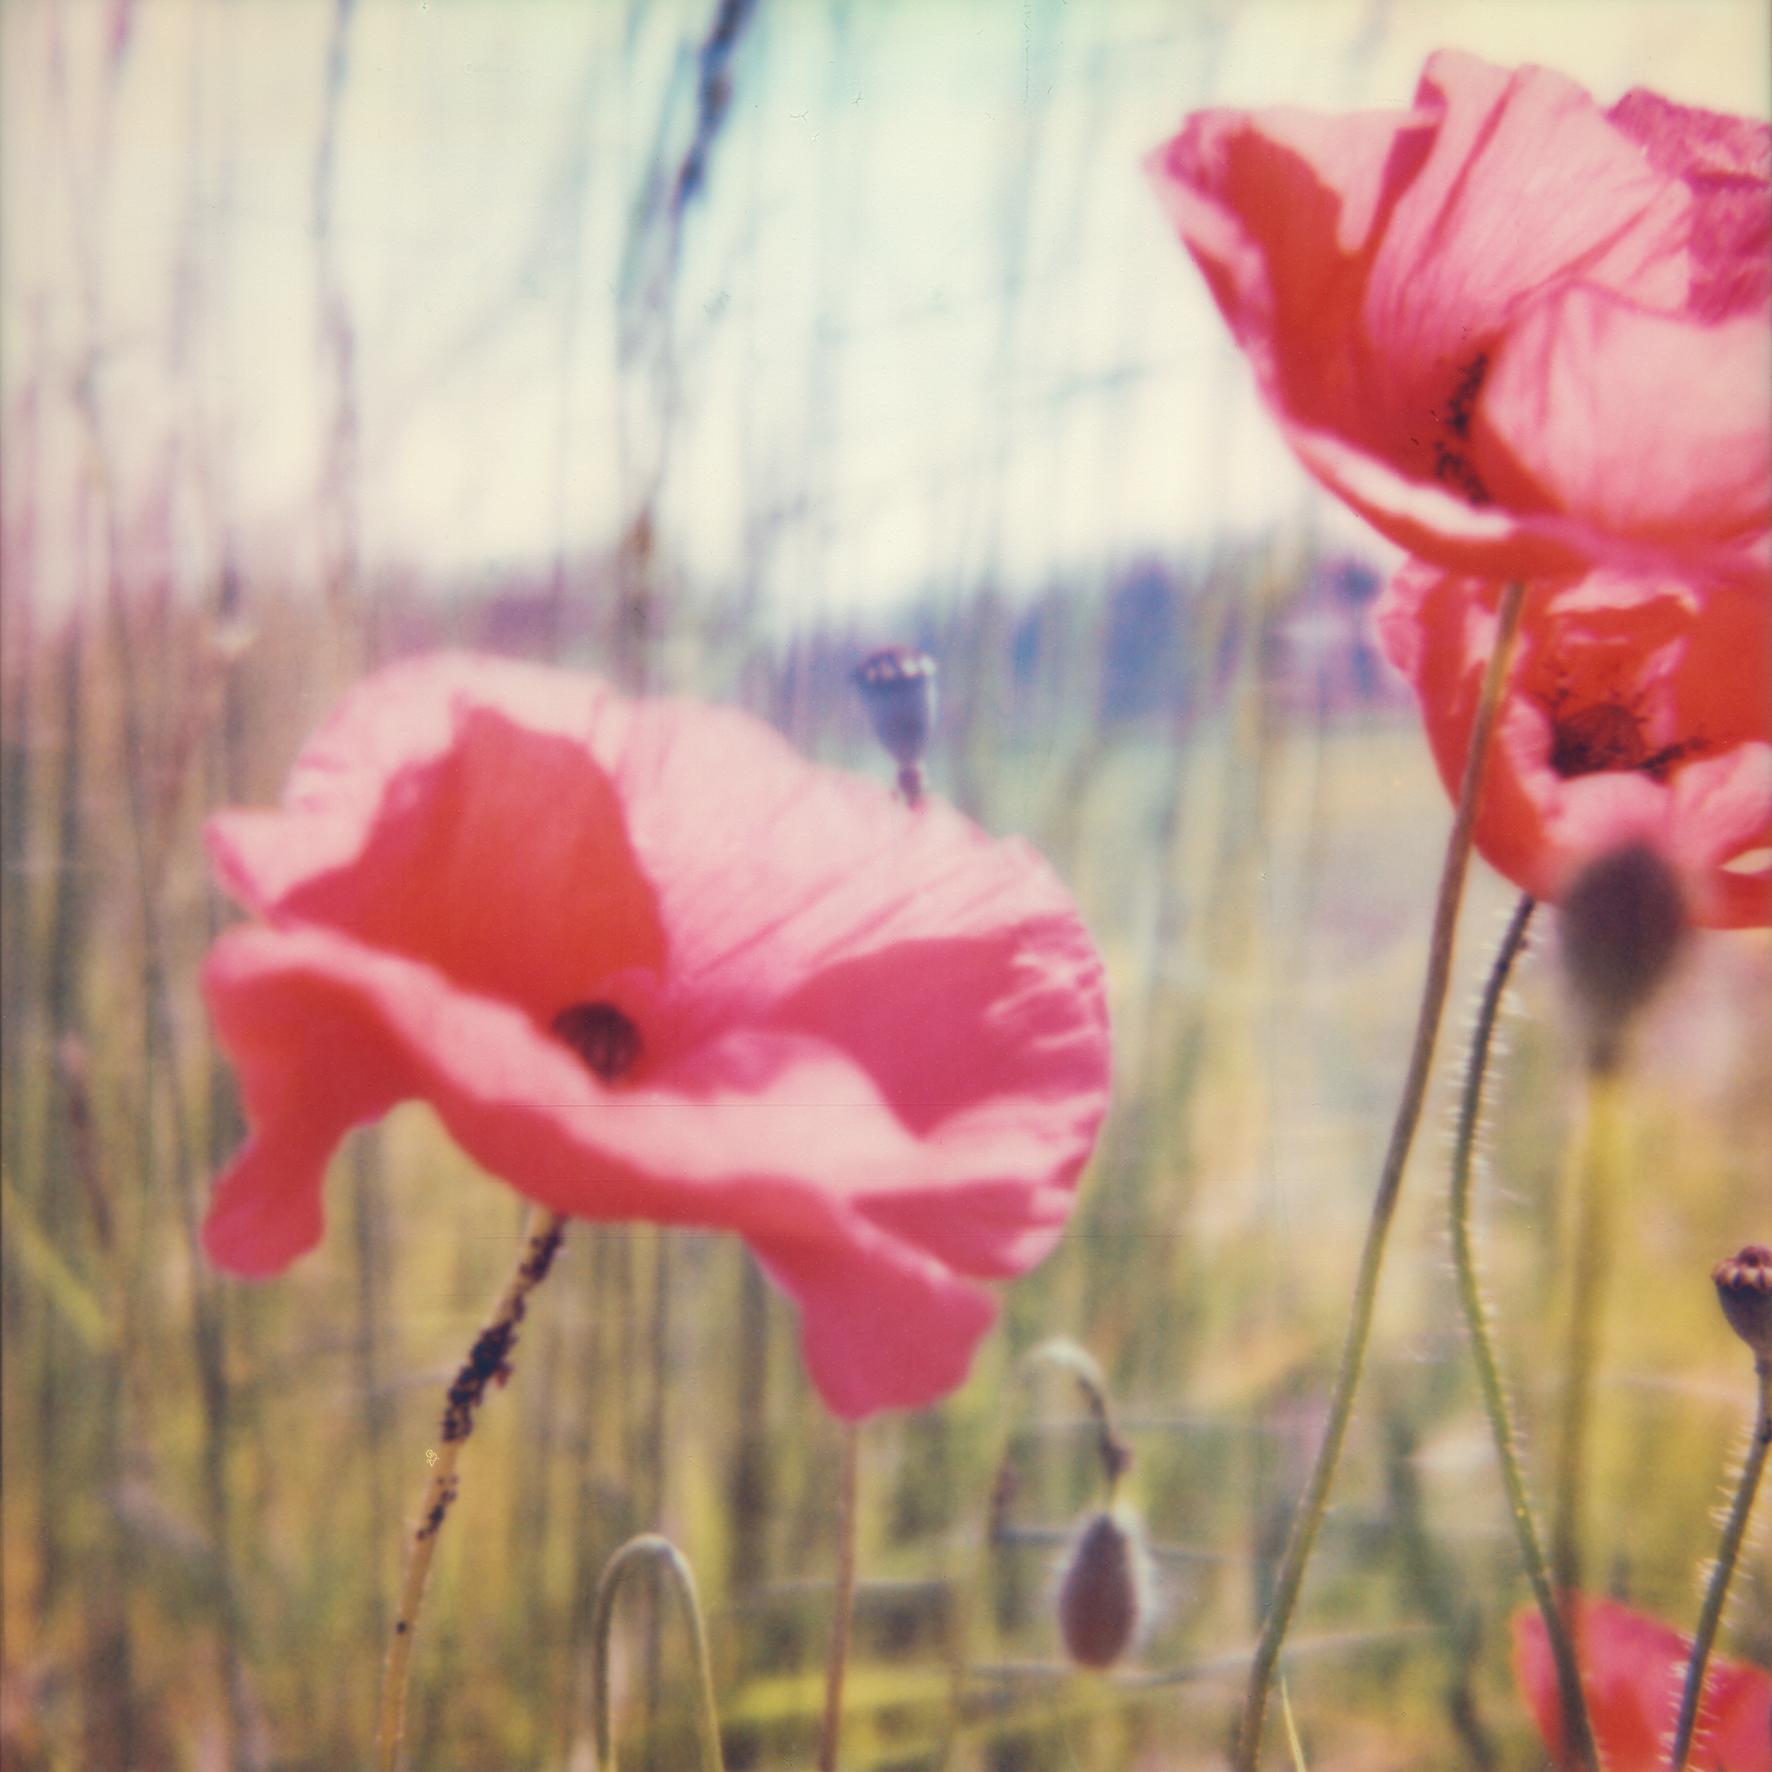 Carmen de Vos Color Photograph - Poppy Realm #01 [From the series Wild Things]